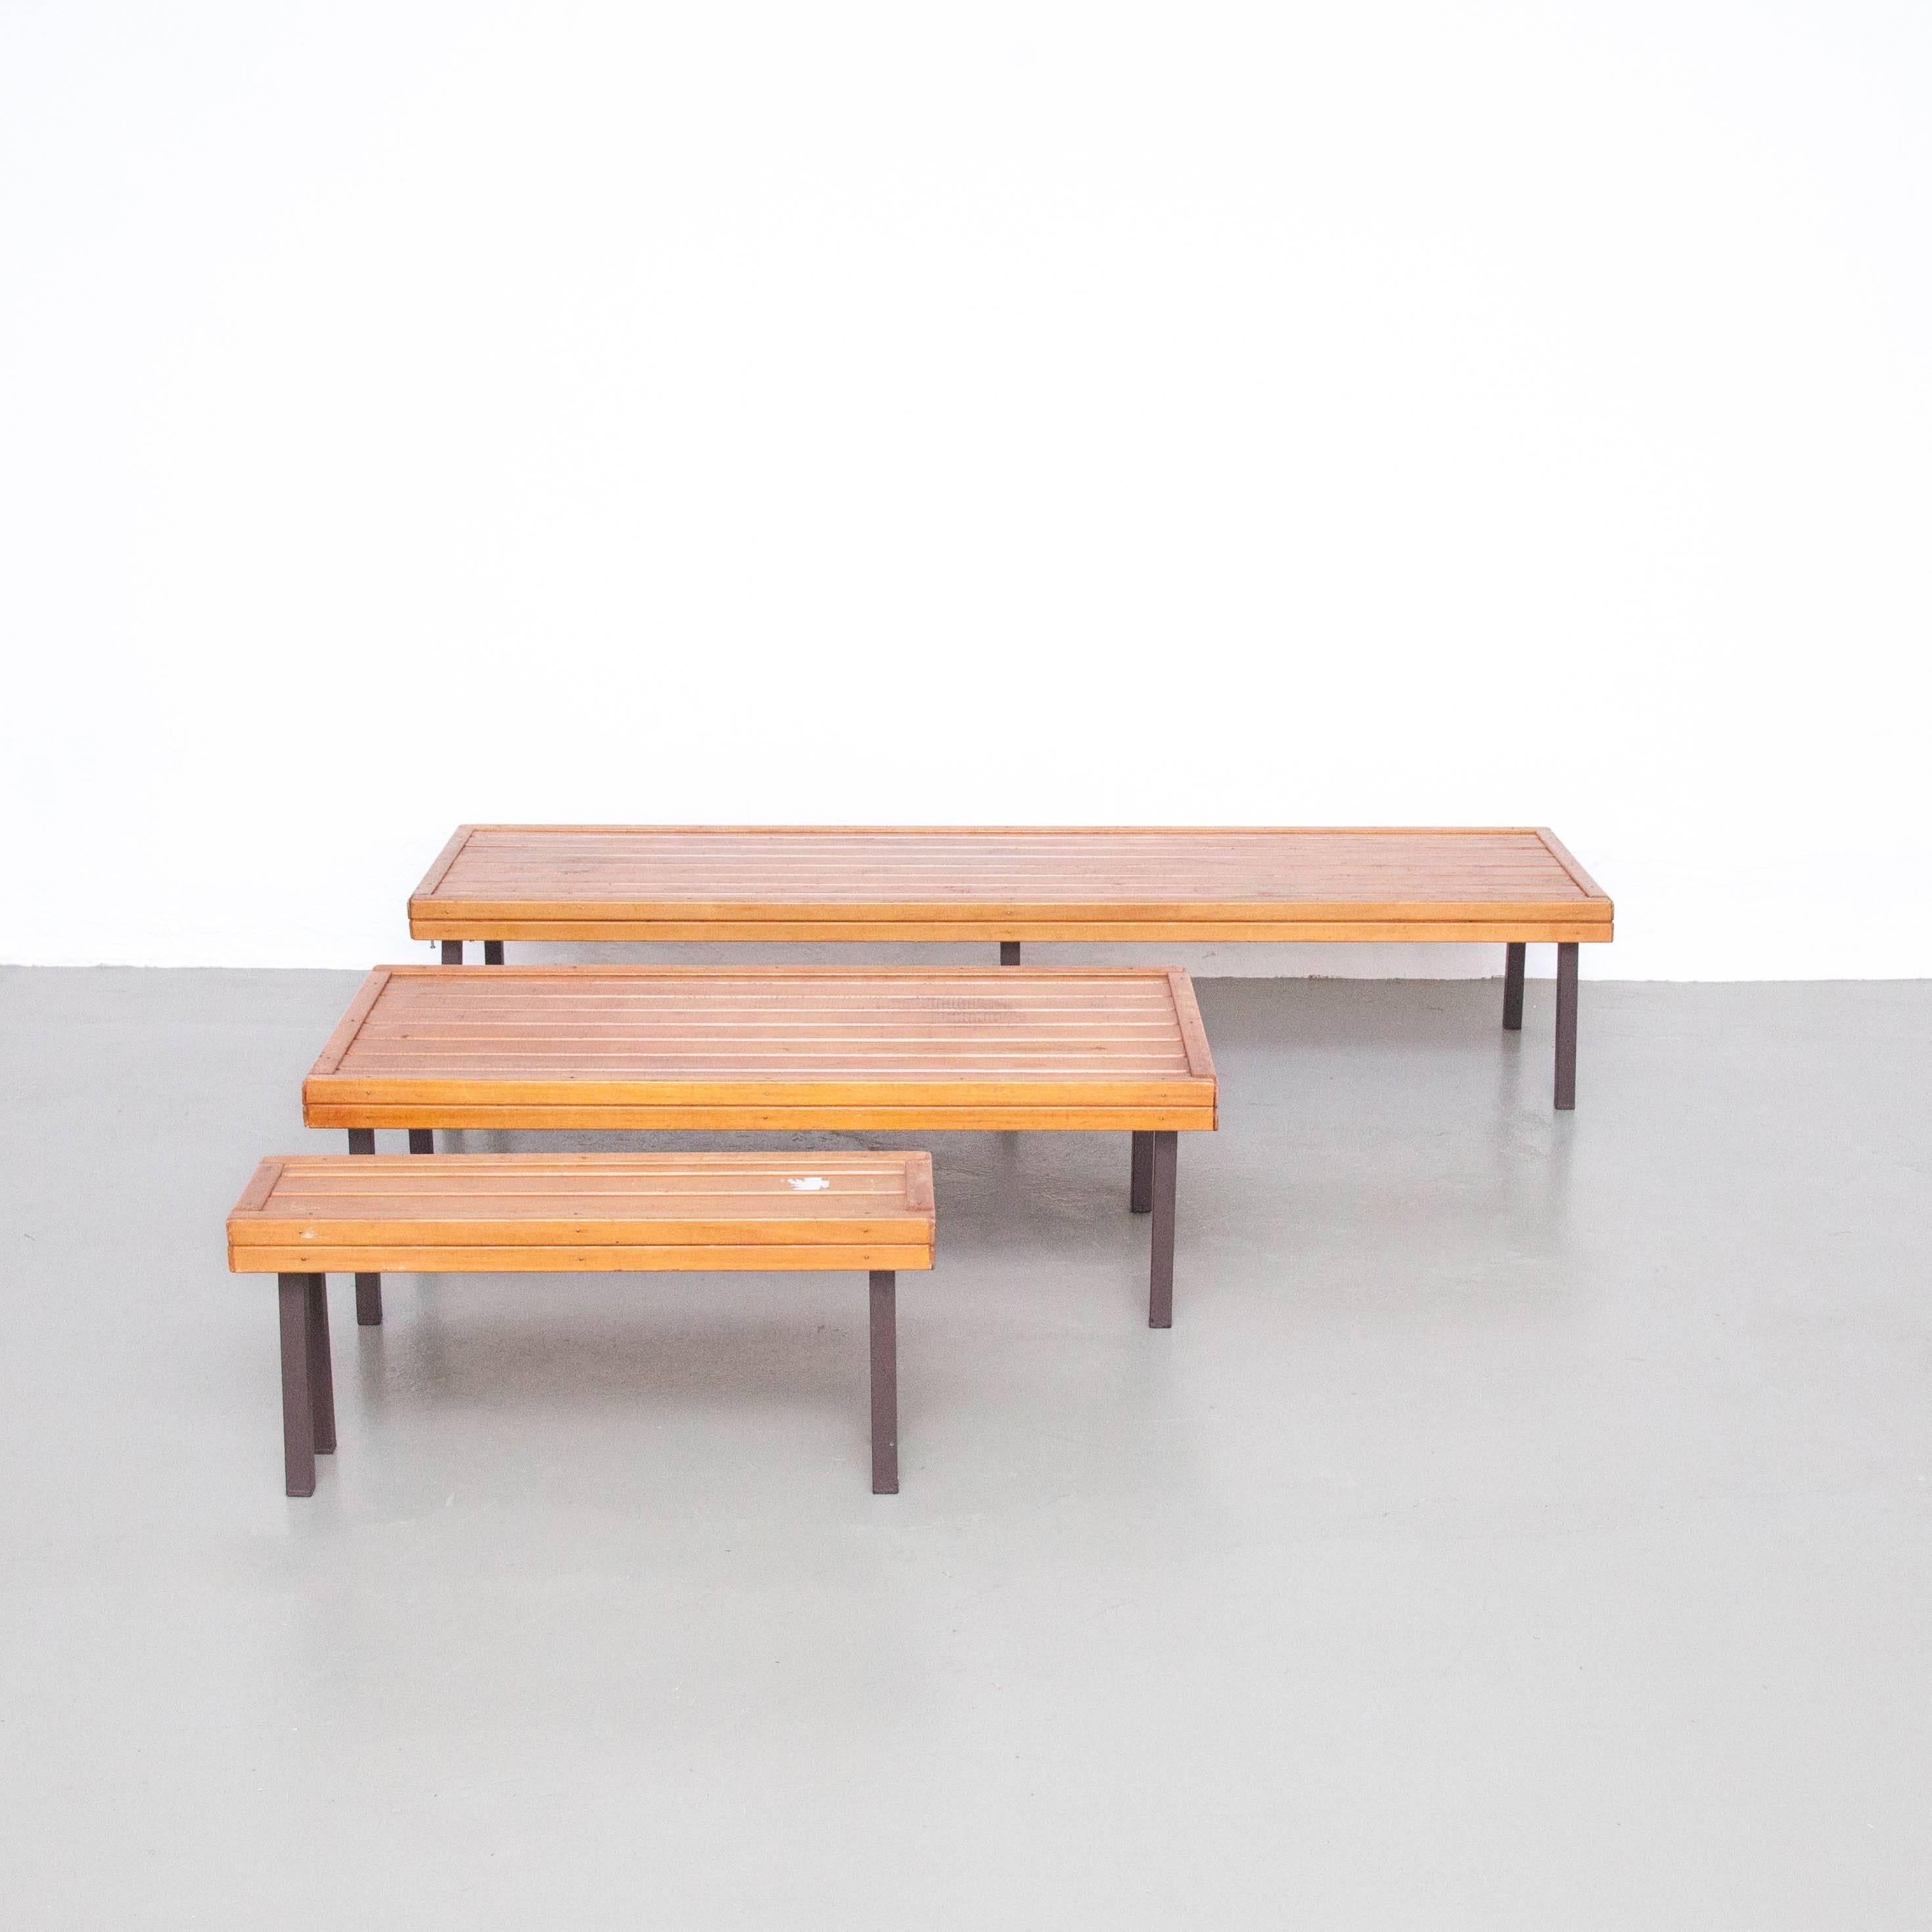 Set midcentury Formalist benches by unknown designer.
Manufactured in France, circa 1960.

In great original condition, with minor wear consistent with age and use, preserving a beautiful patina.